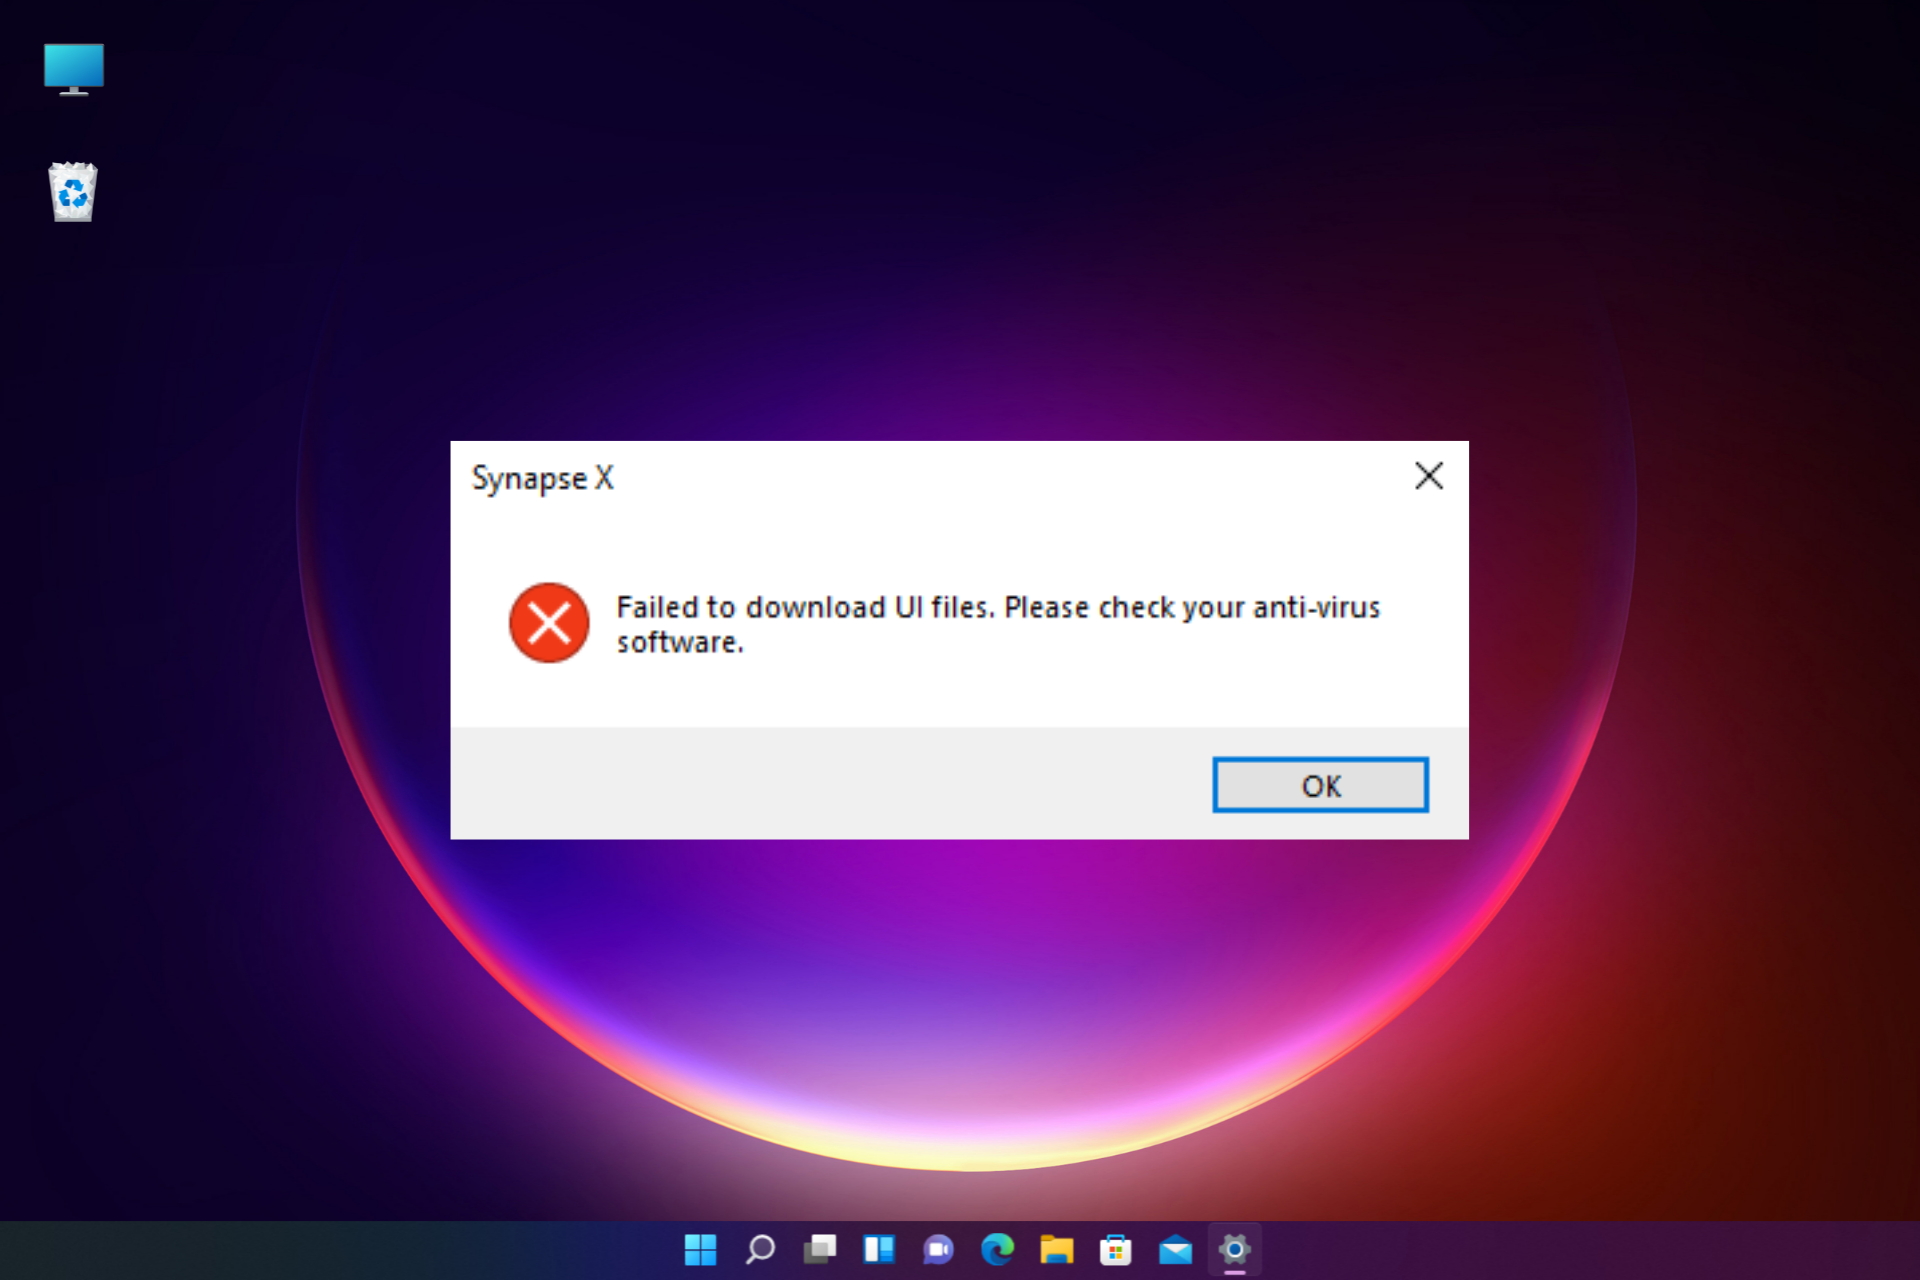 synapse x failed to download launcher data